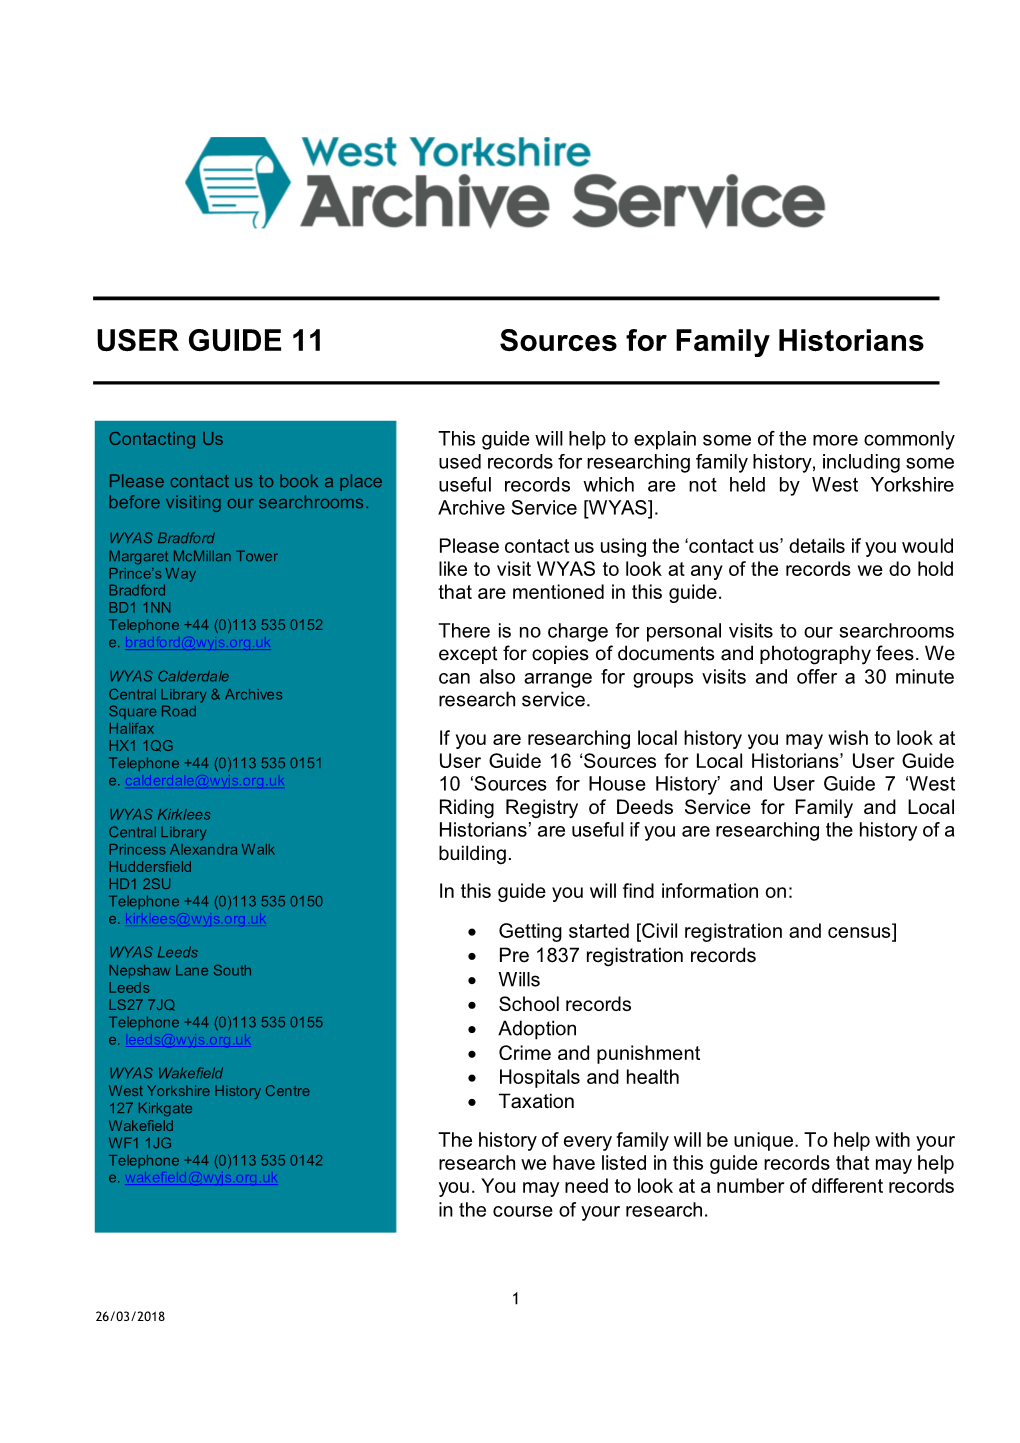 USER GUIDE 11 Sources for Family Historians